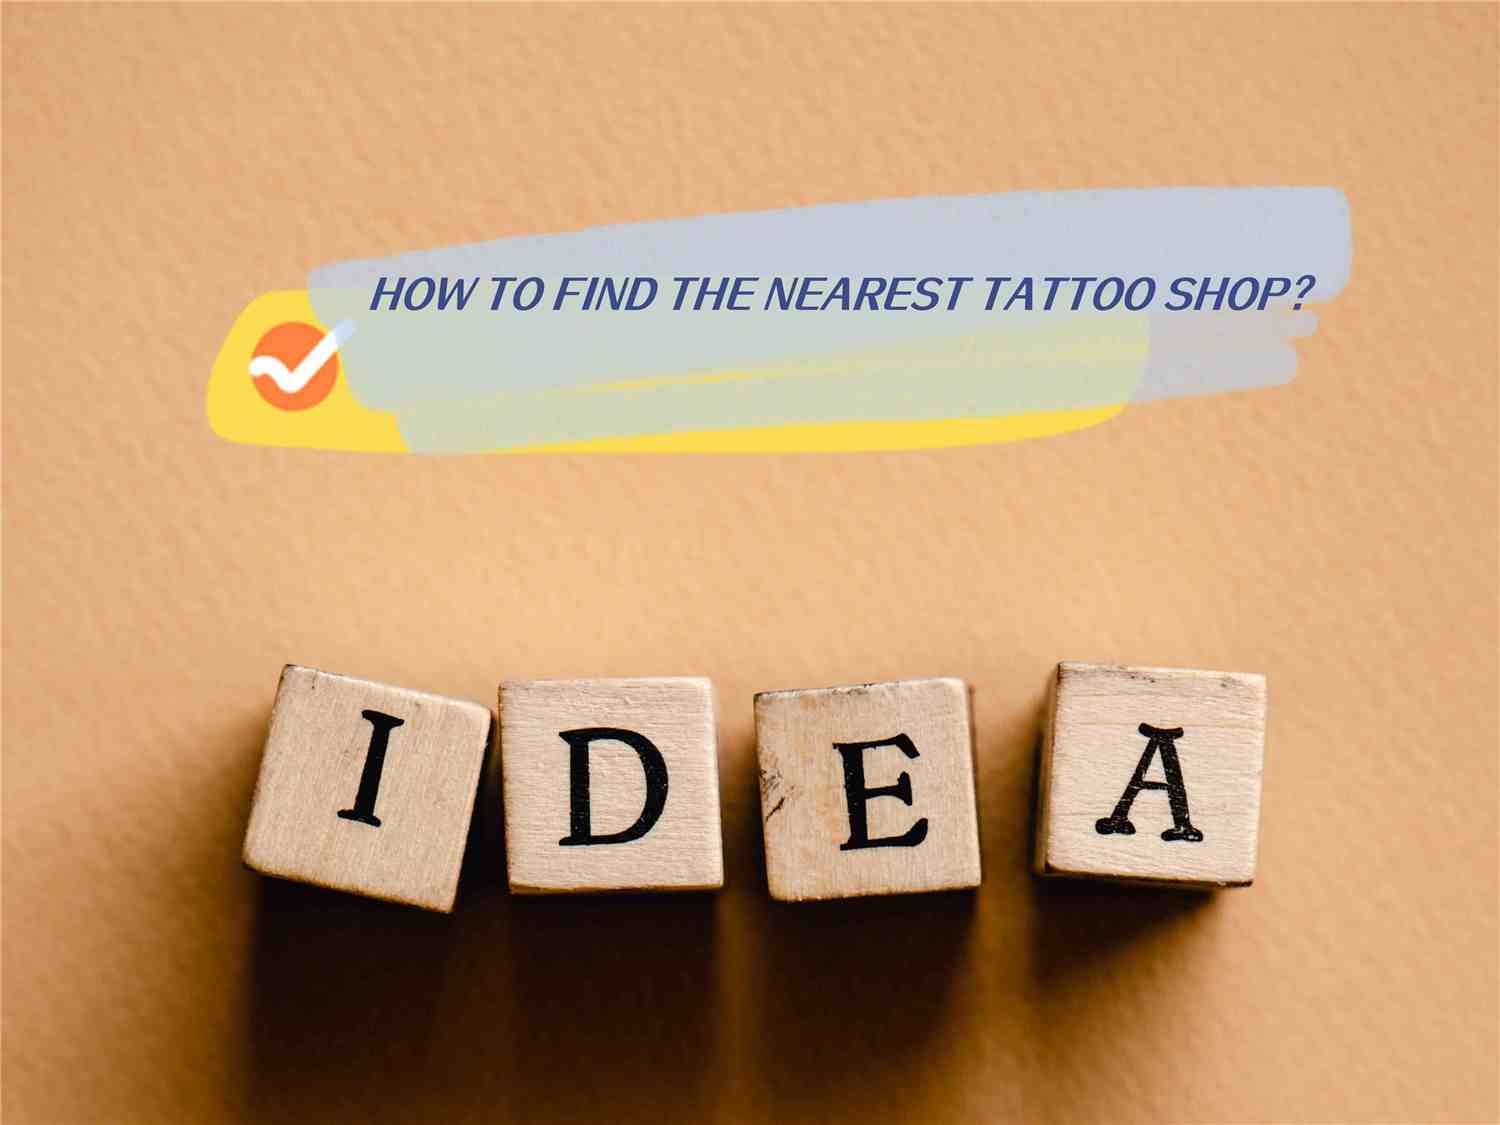 HOW TO FIND THE NEAREST TATTOO SHOP